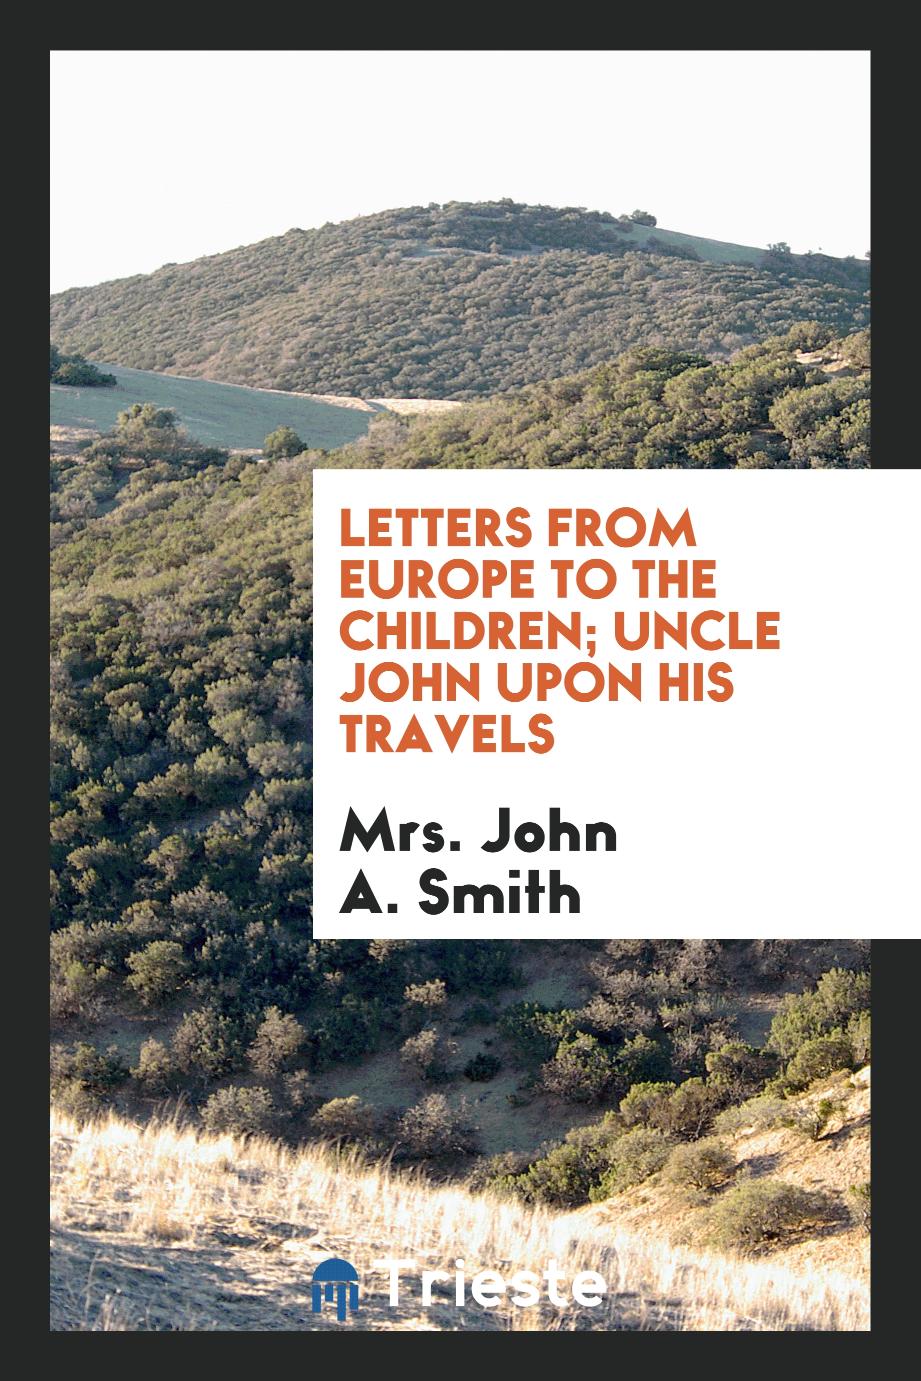 Letters from Europe to the children; Uncle John upon his travels